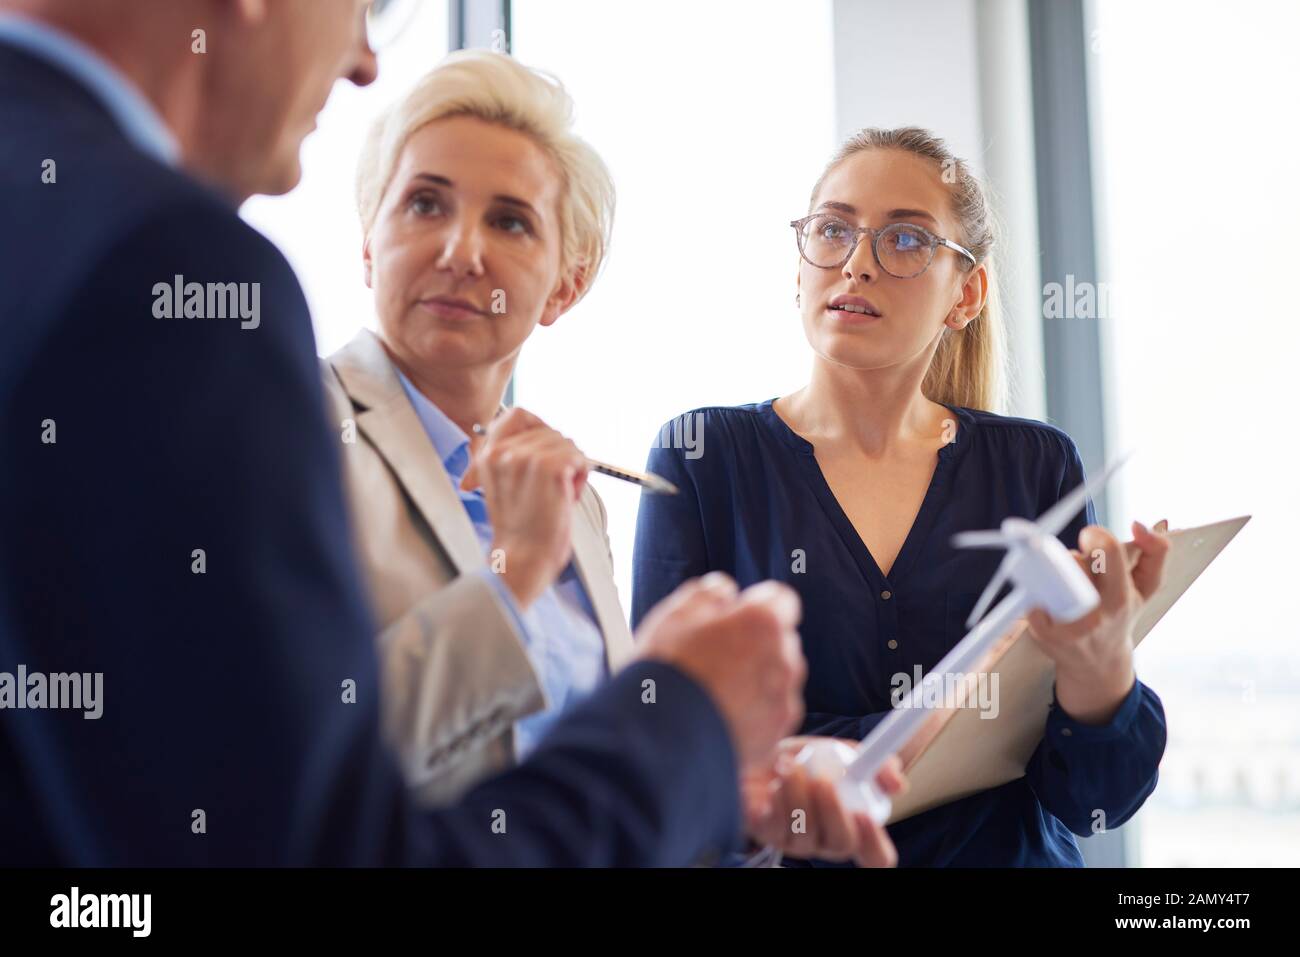 Busy office workers having a conversation in the office Stock Photo